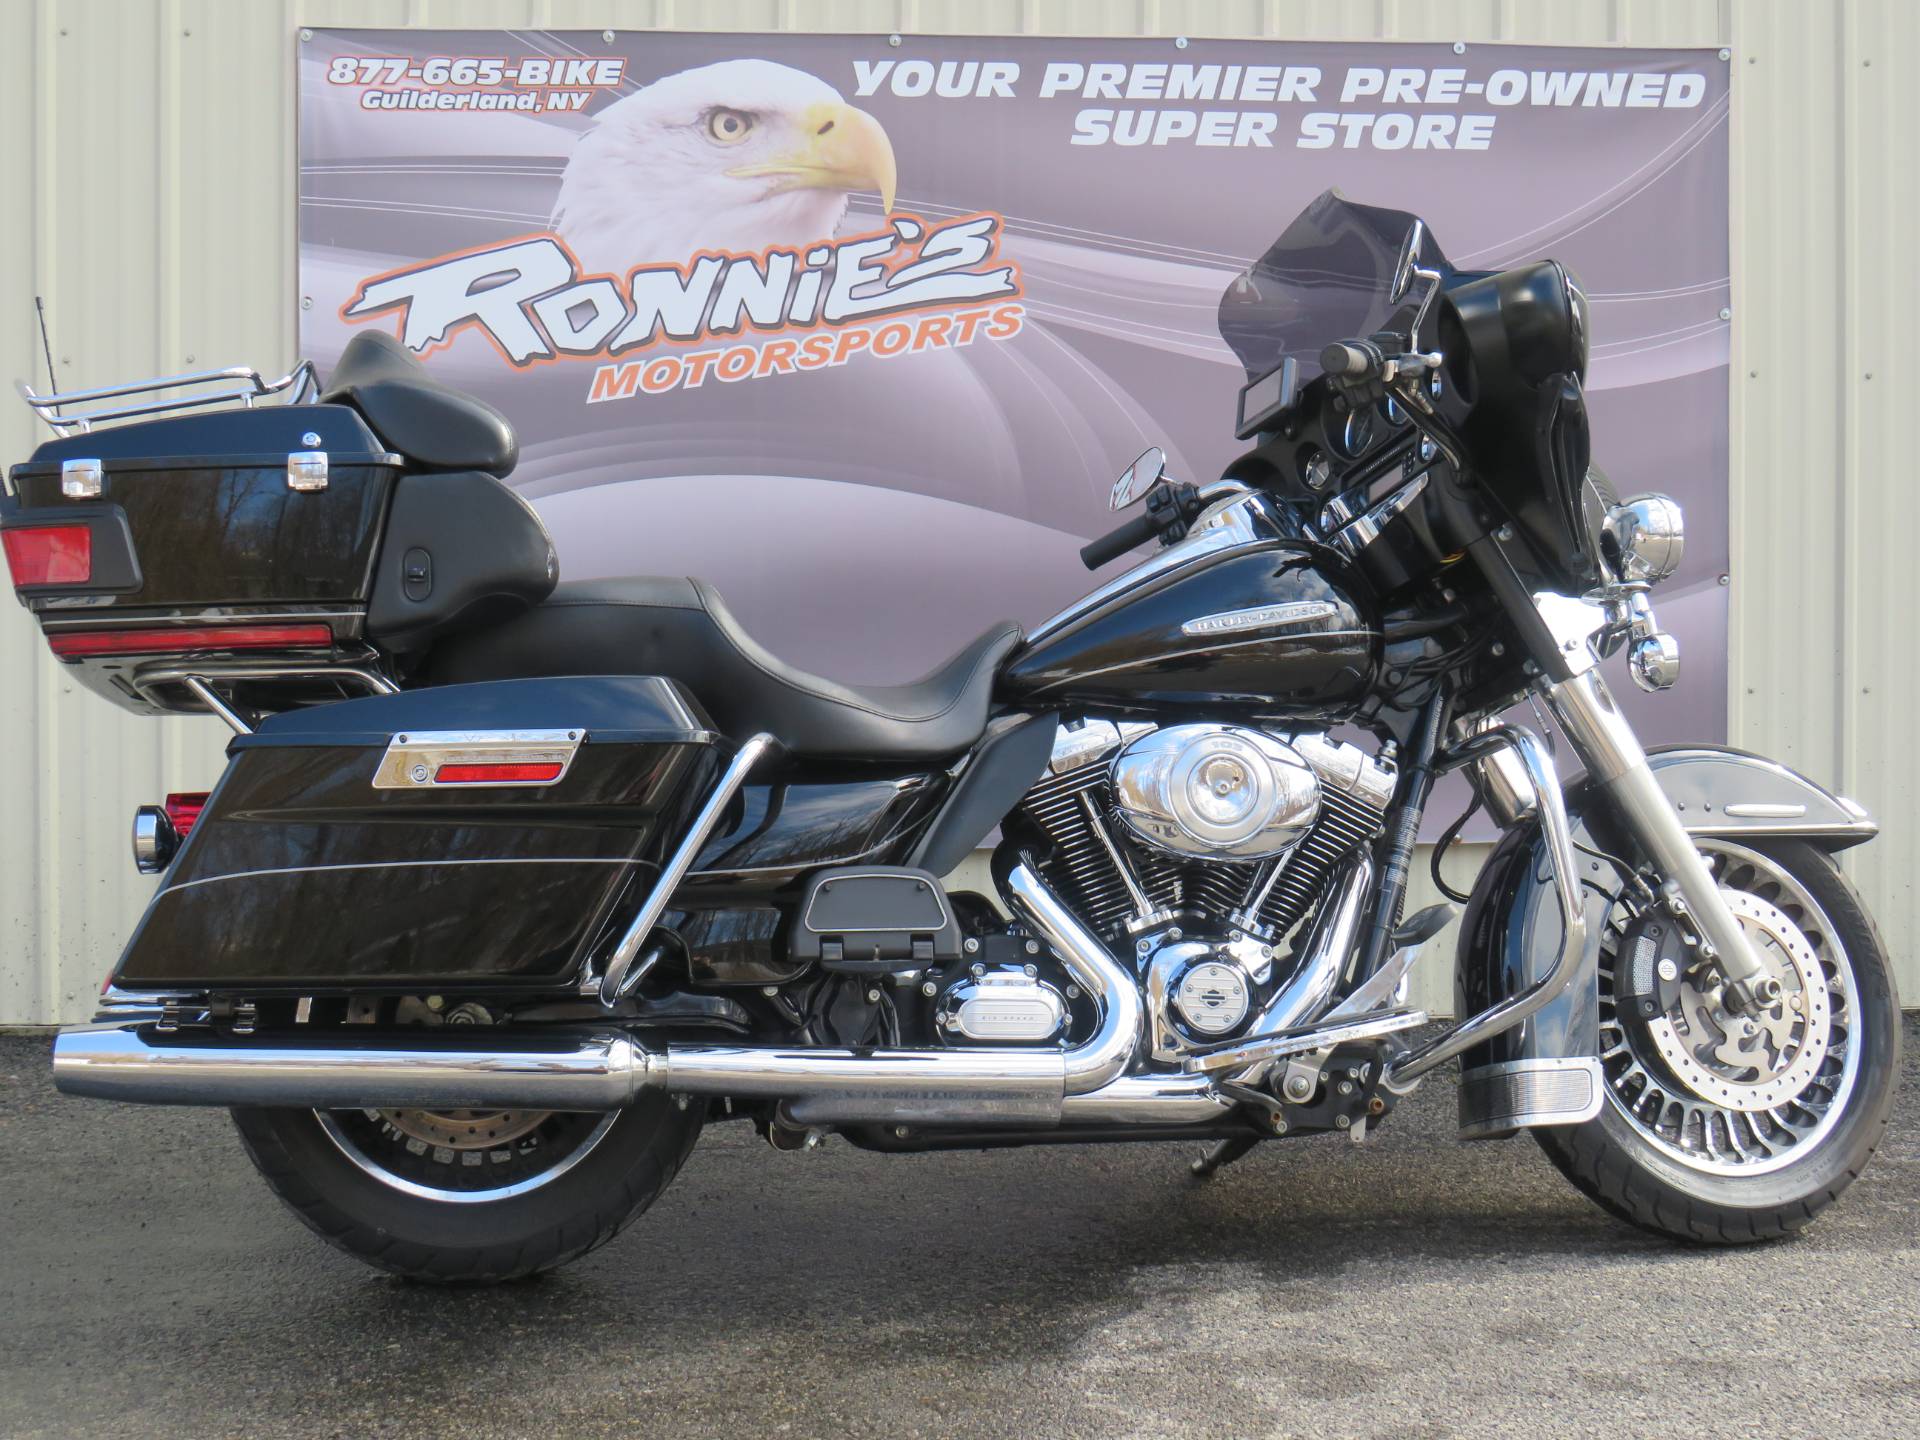 Used 2011 Harley Davidson Electra Glide Ultra Limited Motorcycles In Guilderland Ny Stock Number 633401 Ronniesmotorsports Com